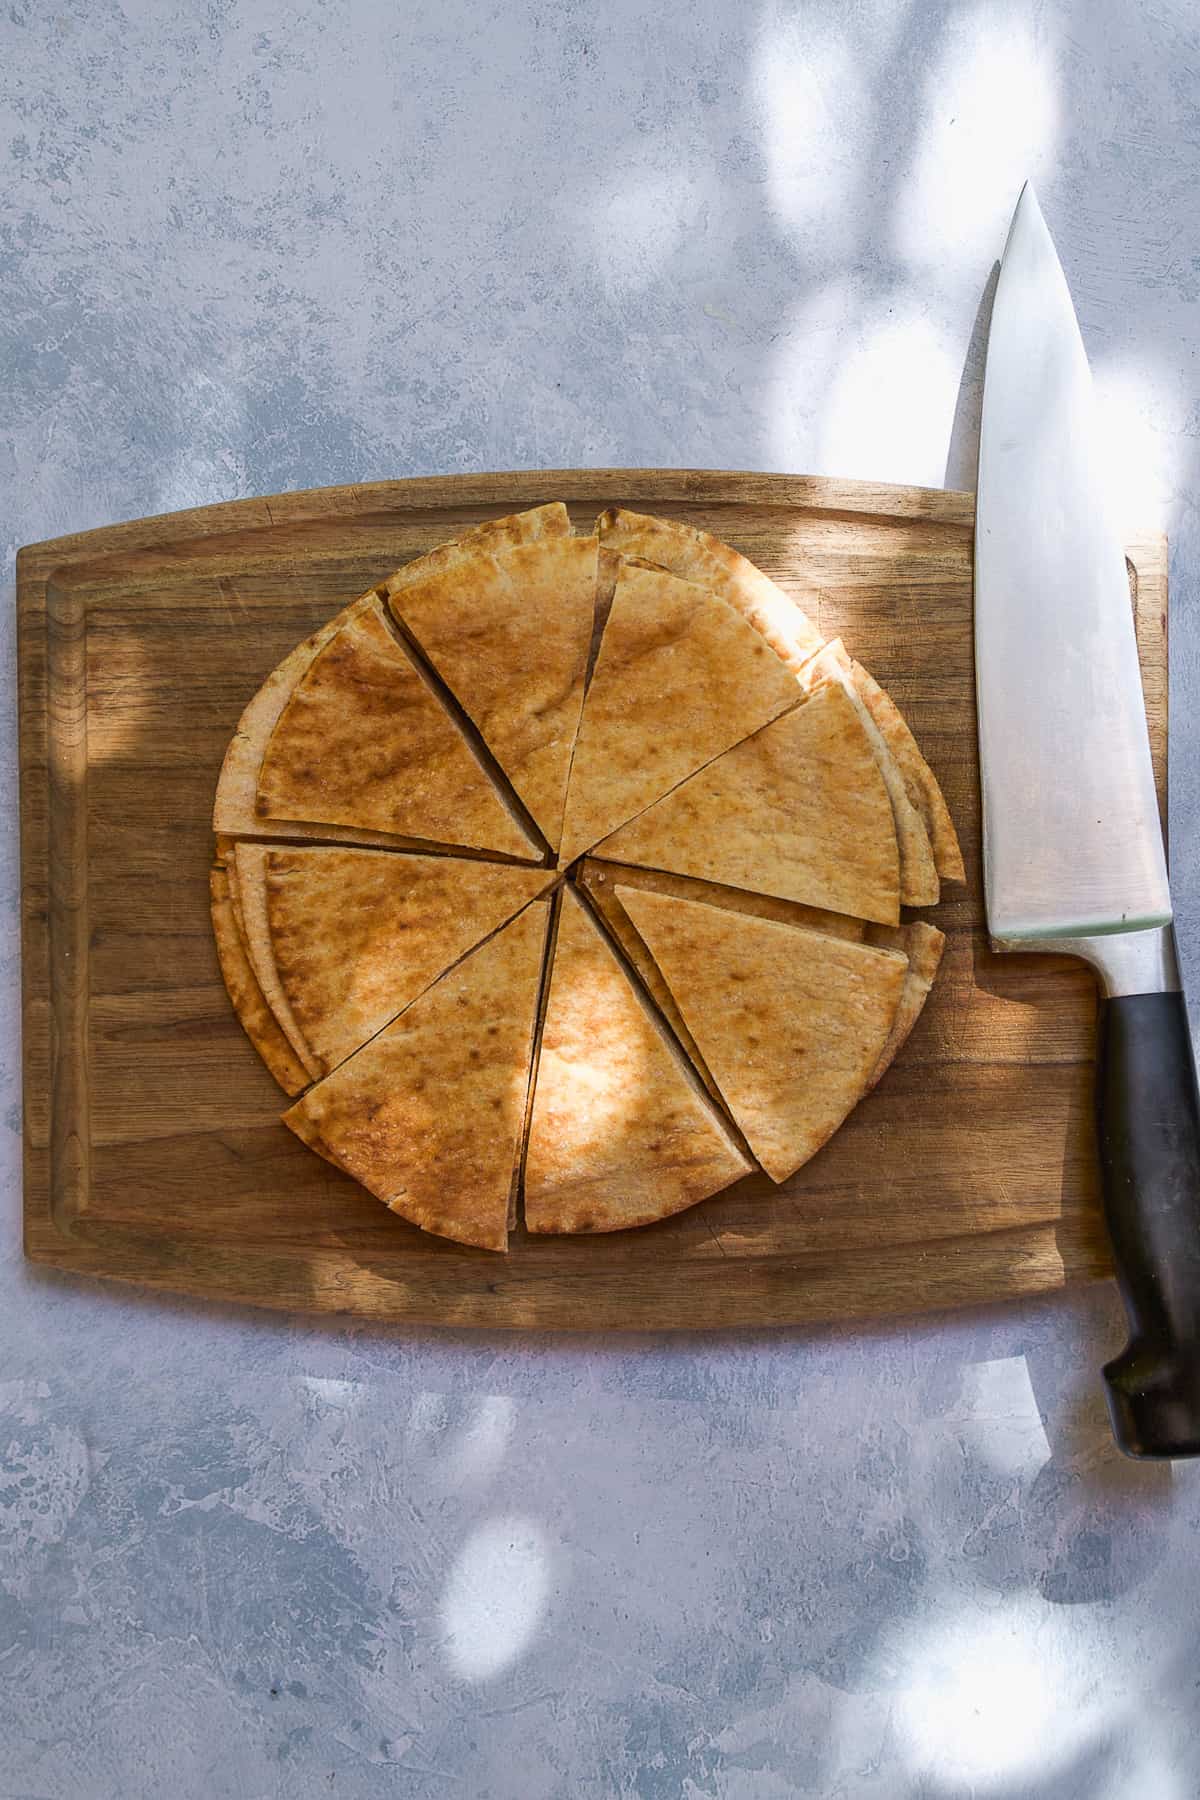 Overhead view of pita being cut into triangles on a wooden cutting board.